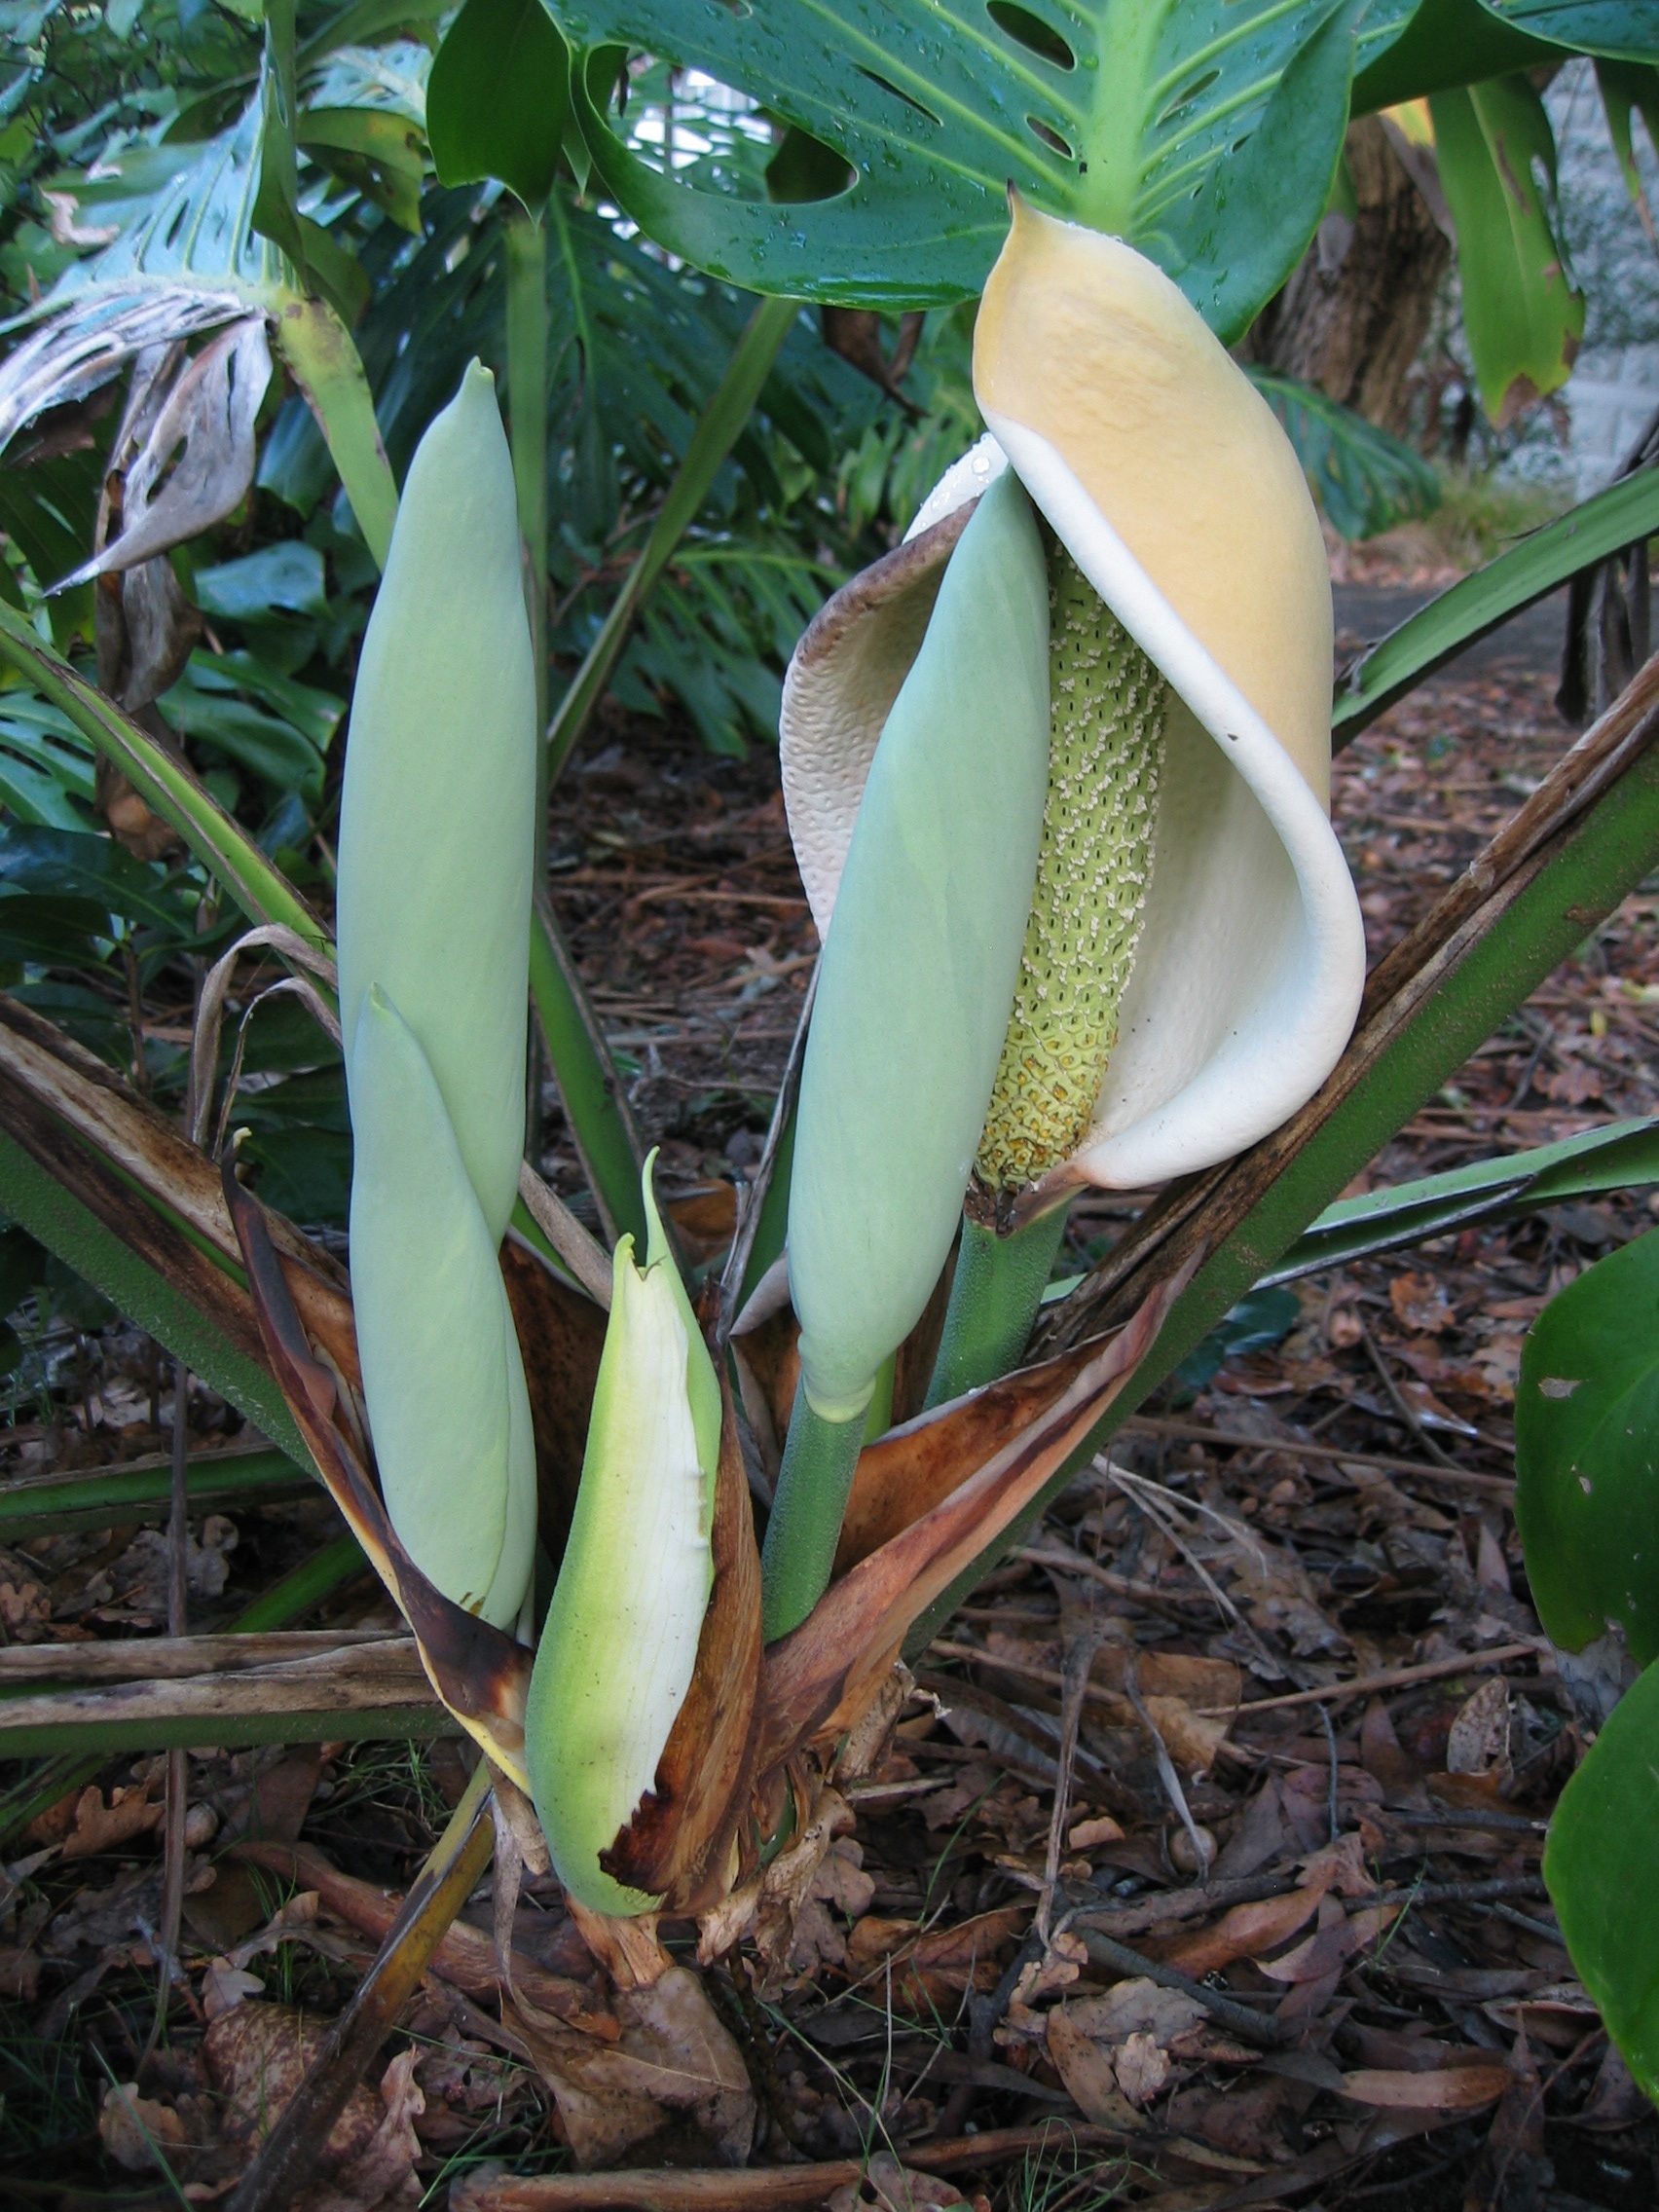 Monstera deliciosa flower and buds